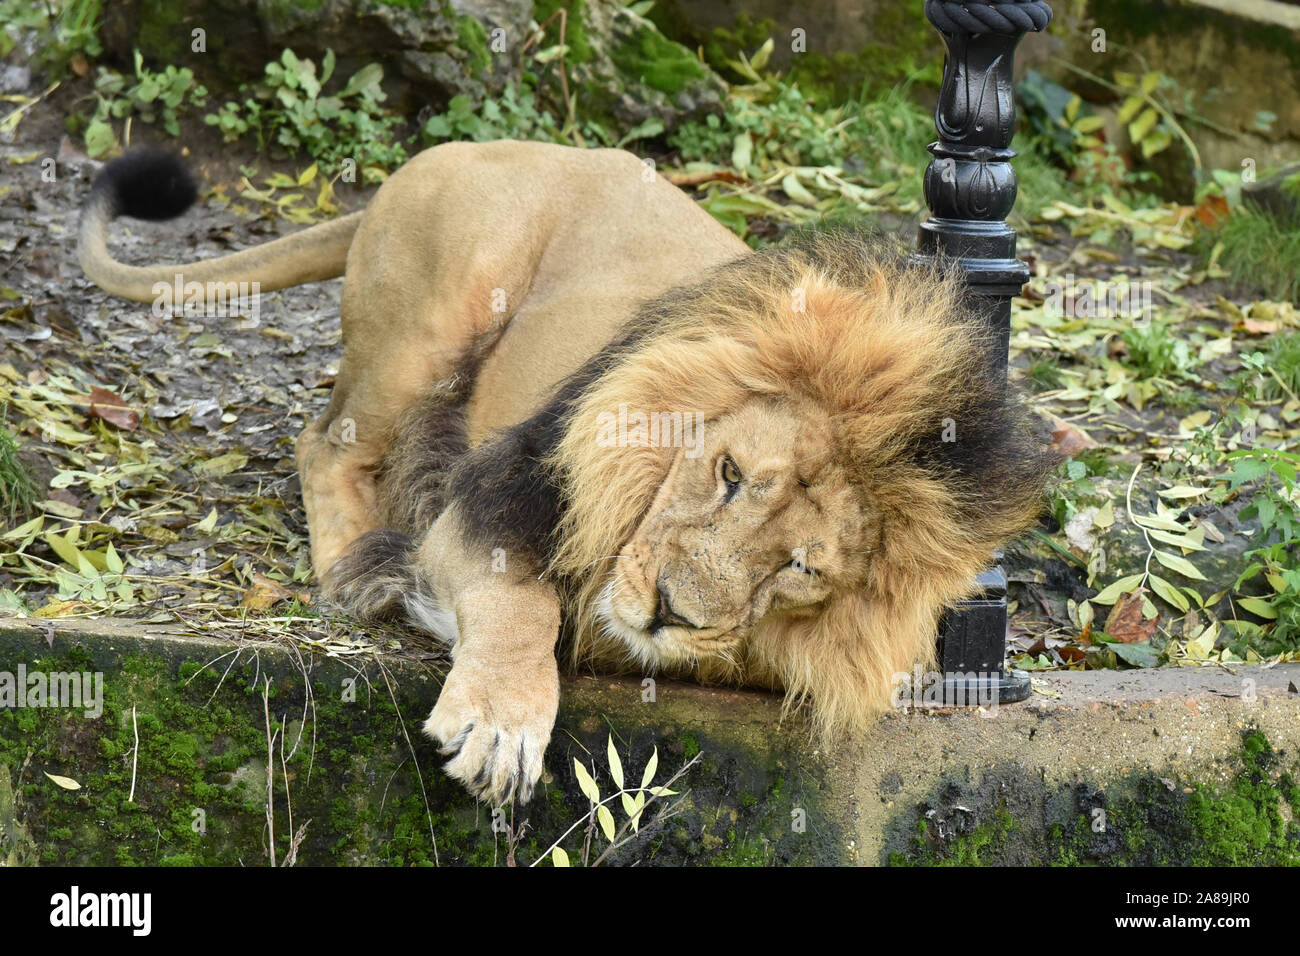 London, UK. 07th Nov, 2019. Bhanu the male lion gets to grips with a new custom-made, scratching lamp-post made off cast iron and hessian rope, to launch a partnership between ZSL London Zoo and The Bridge Theatre and their new production of The Lion, the Witch and the Wardrobe this Christmas at ZSL London Zoo. Credit: SOPA Images Limited/Alamy Live News Stock Photo